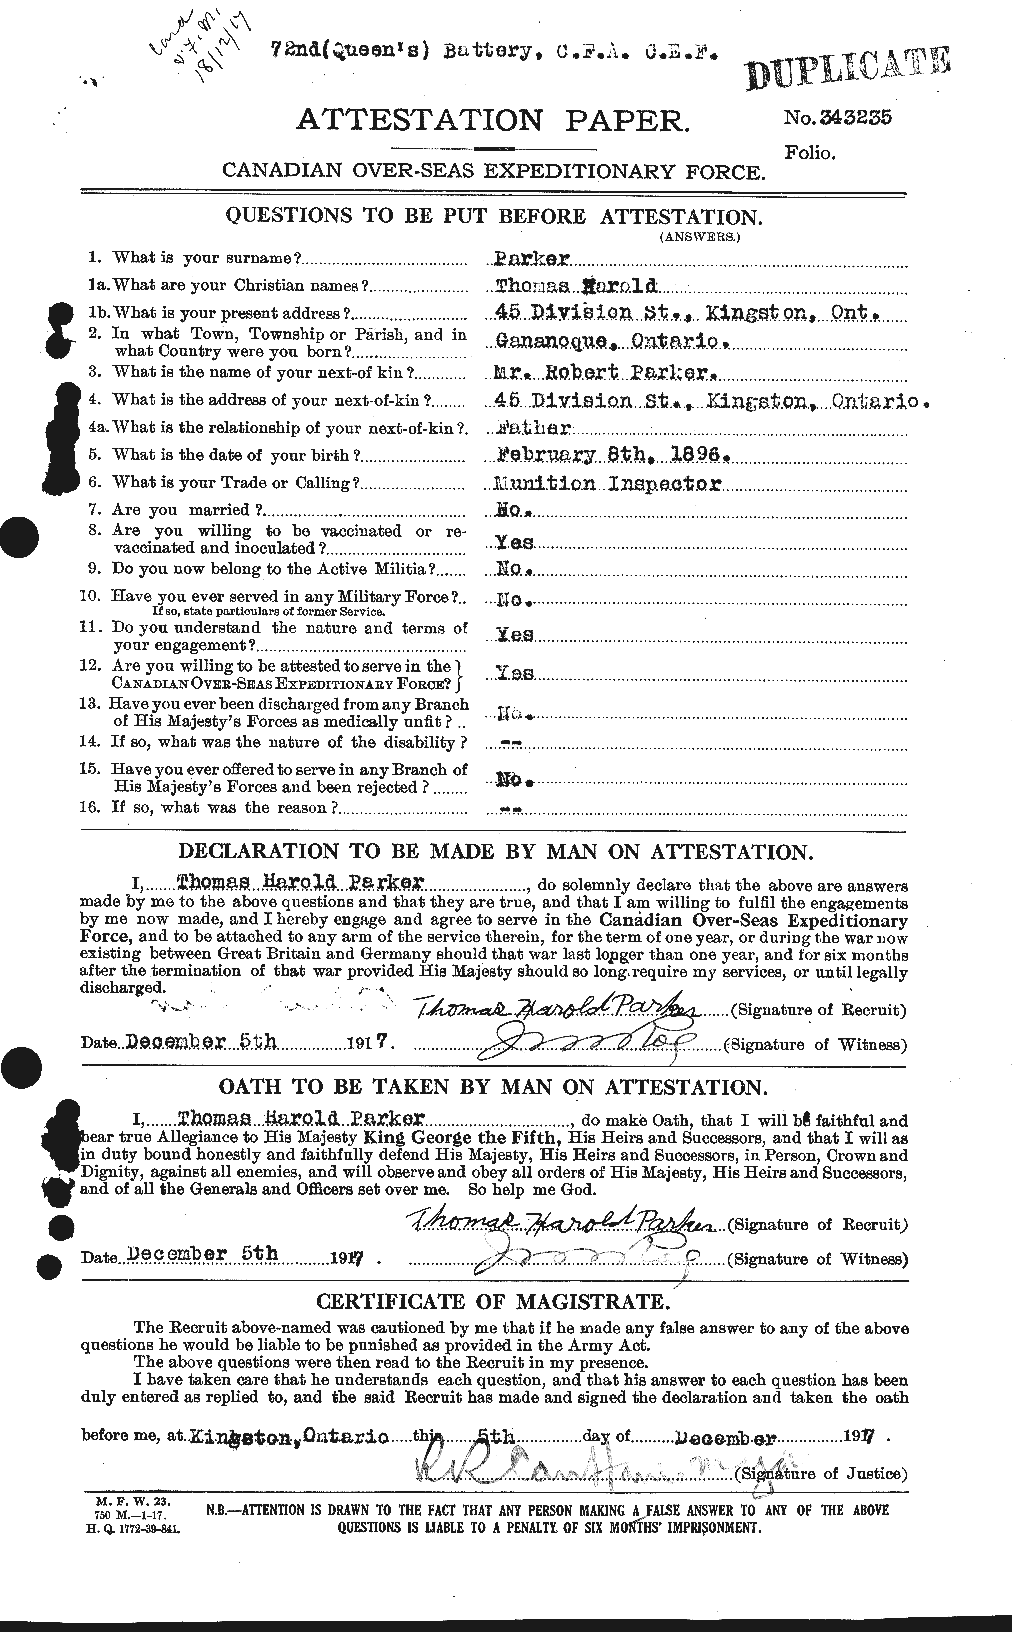 Personnel Records of the First World War - CEF 565667a